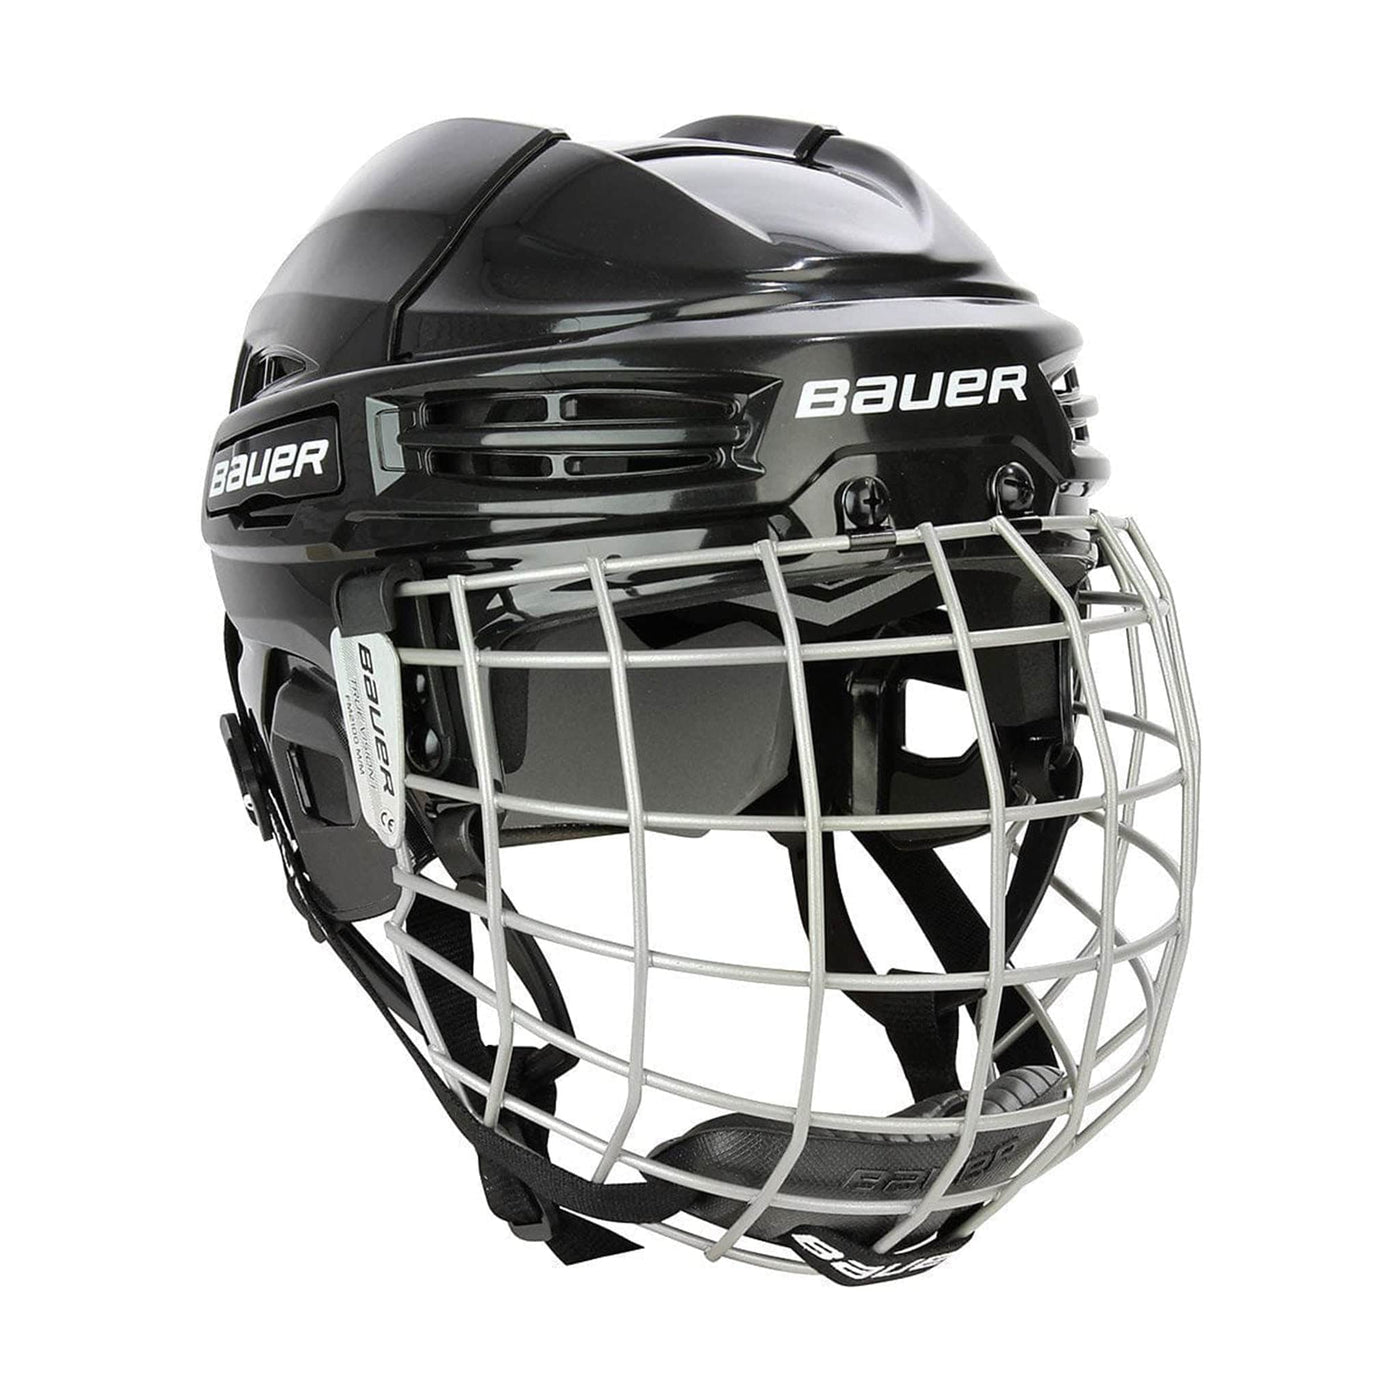 Bauer IMS 5.0 Hockey Helmet / Cage Combo - The Hockey Shop Source For Sports